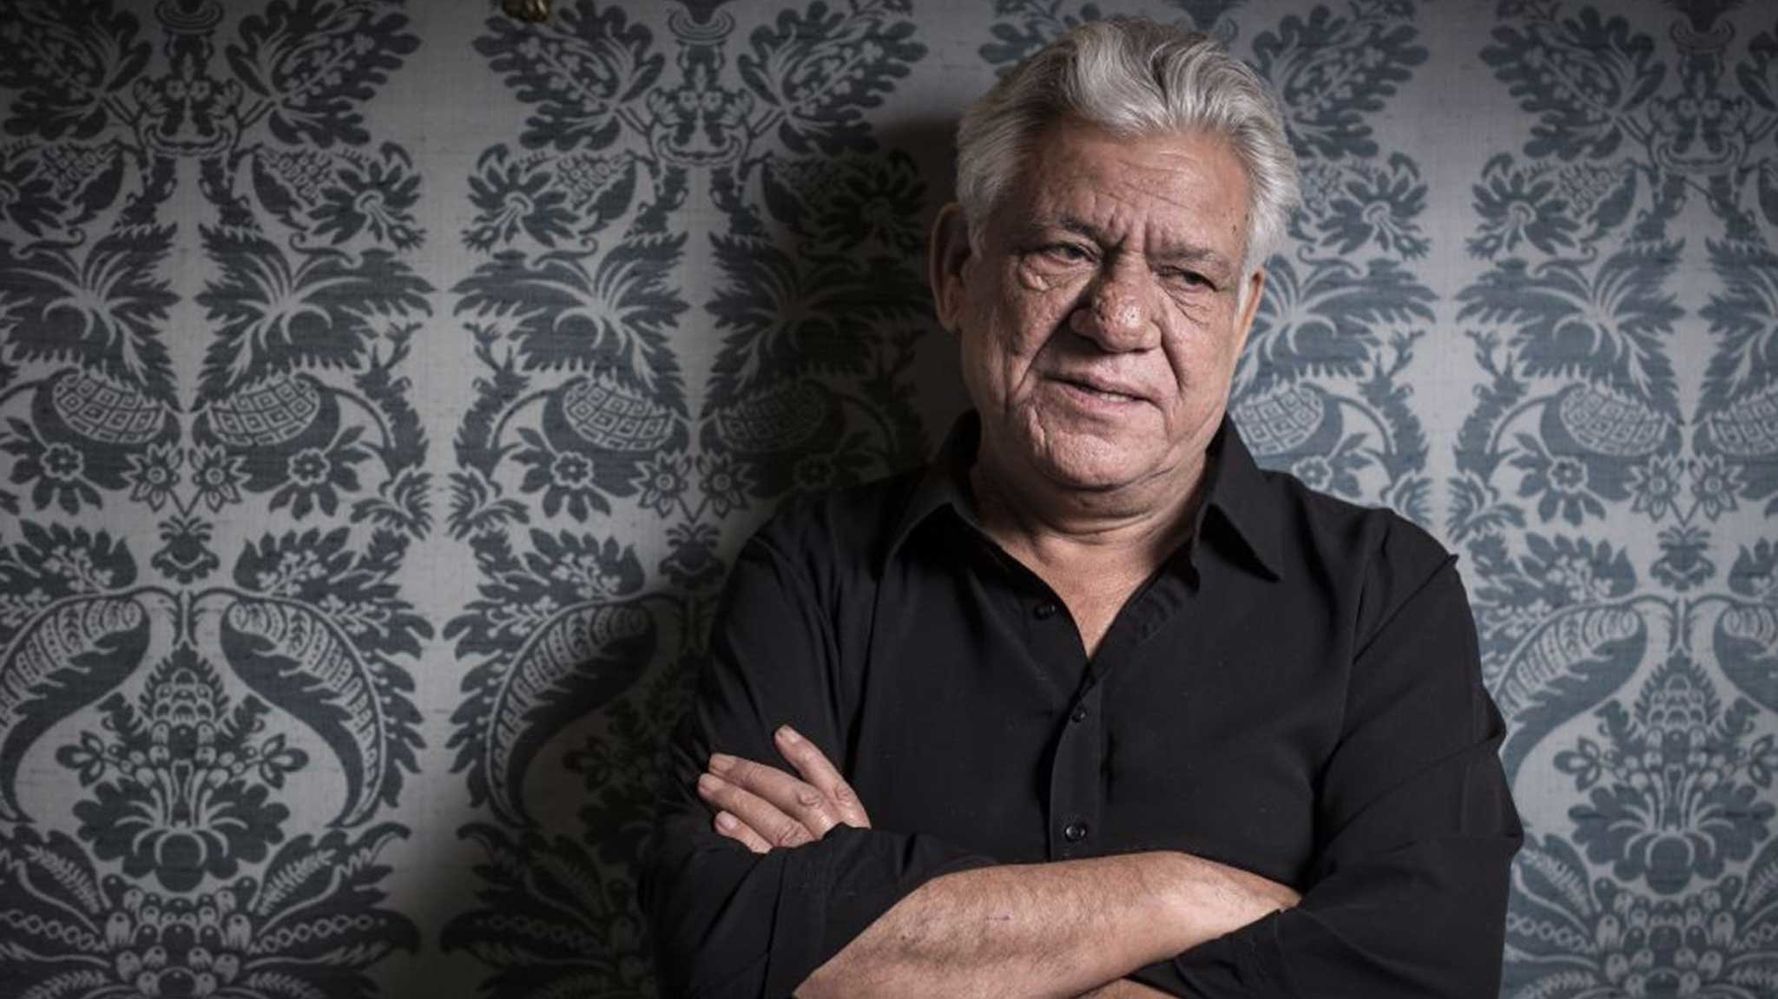 Two Broken Marriages, A Domestic Abuse Case, A Son Caught In Between... Om  Puri Had A Turbulent Personal Life | HuffPost Entertainment